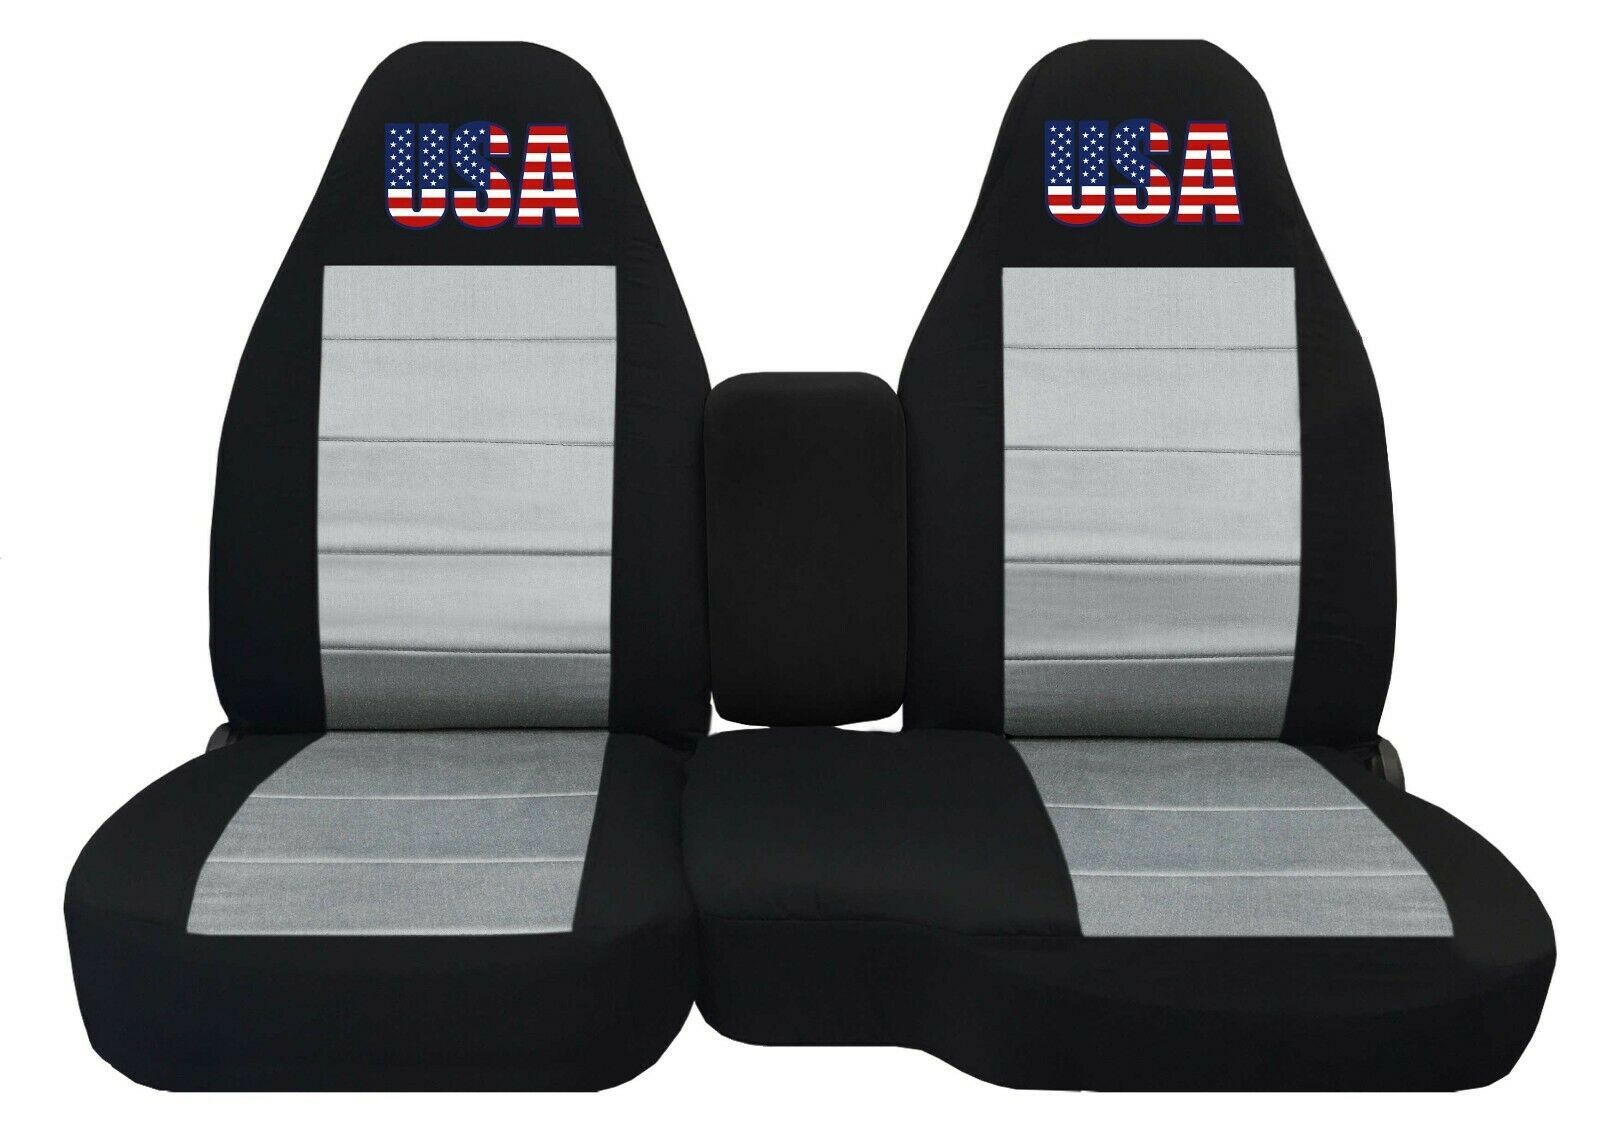 Primary image for Front set car seat covers fits FORD RANGER 1991-2012 60/40 highback - USA design